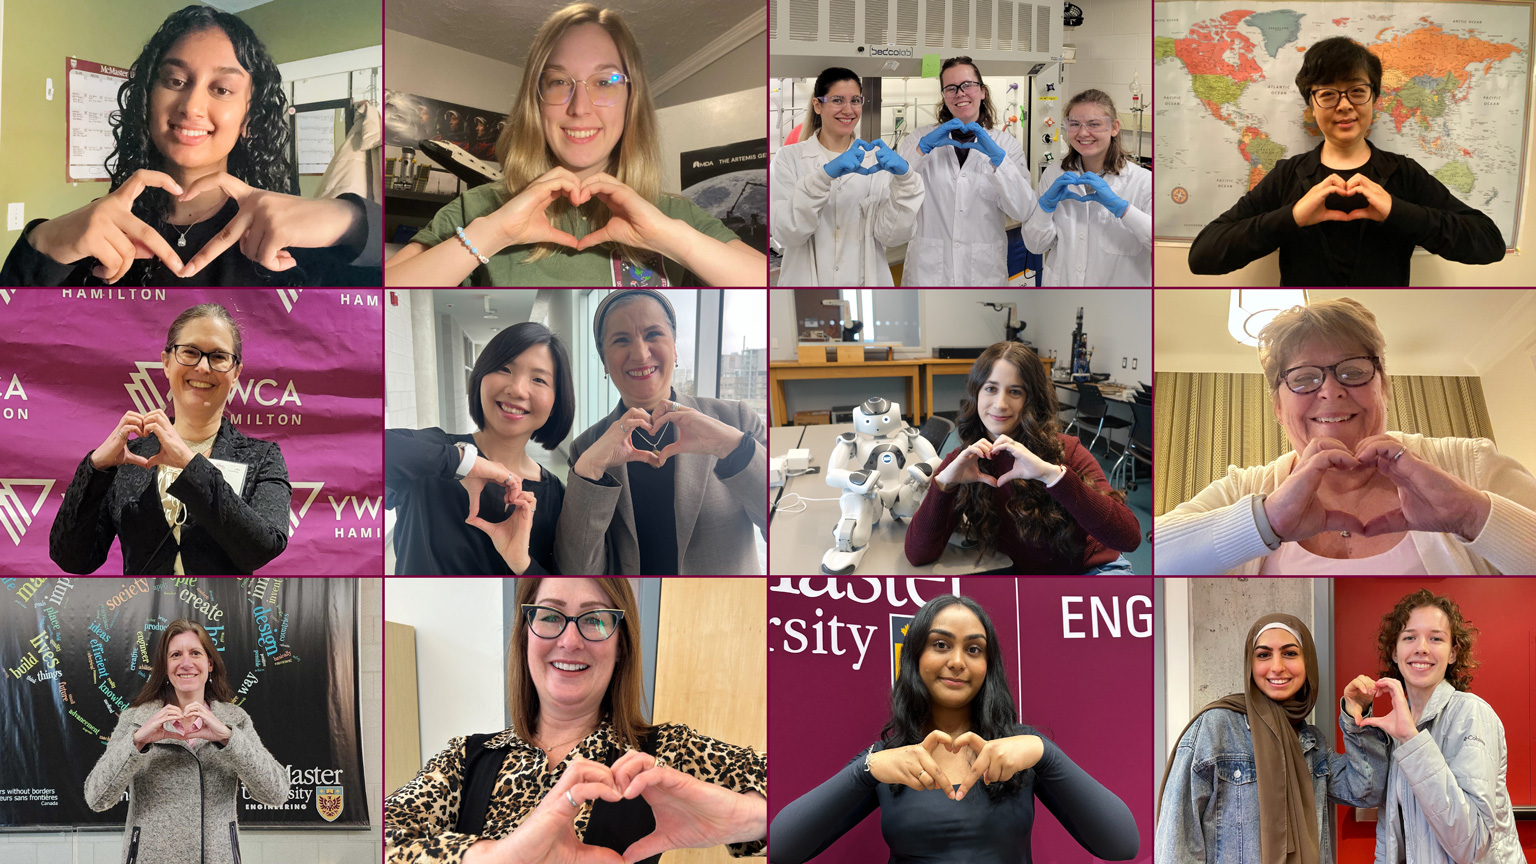 A collage of woman posing with the heart hand